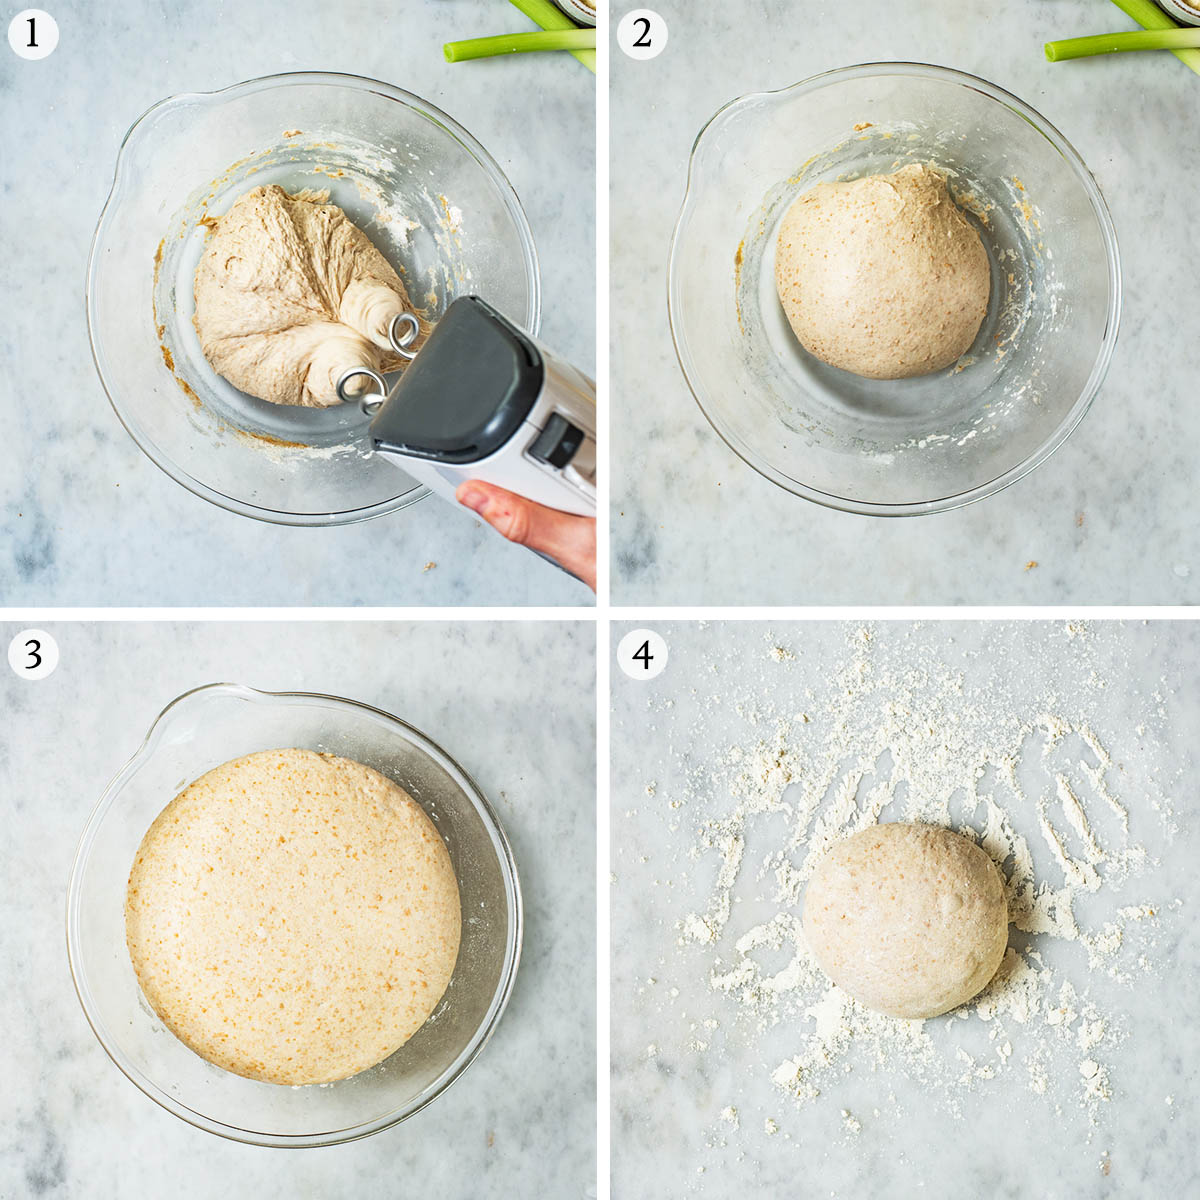 Making pizza dough steps 1-4, kneading, rising, and turning onto a floured surface.